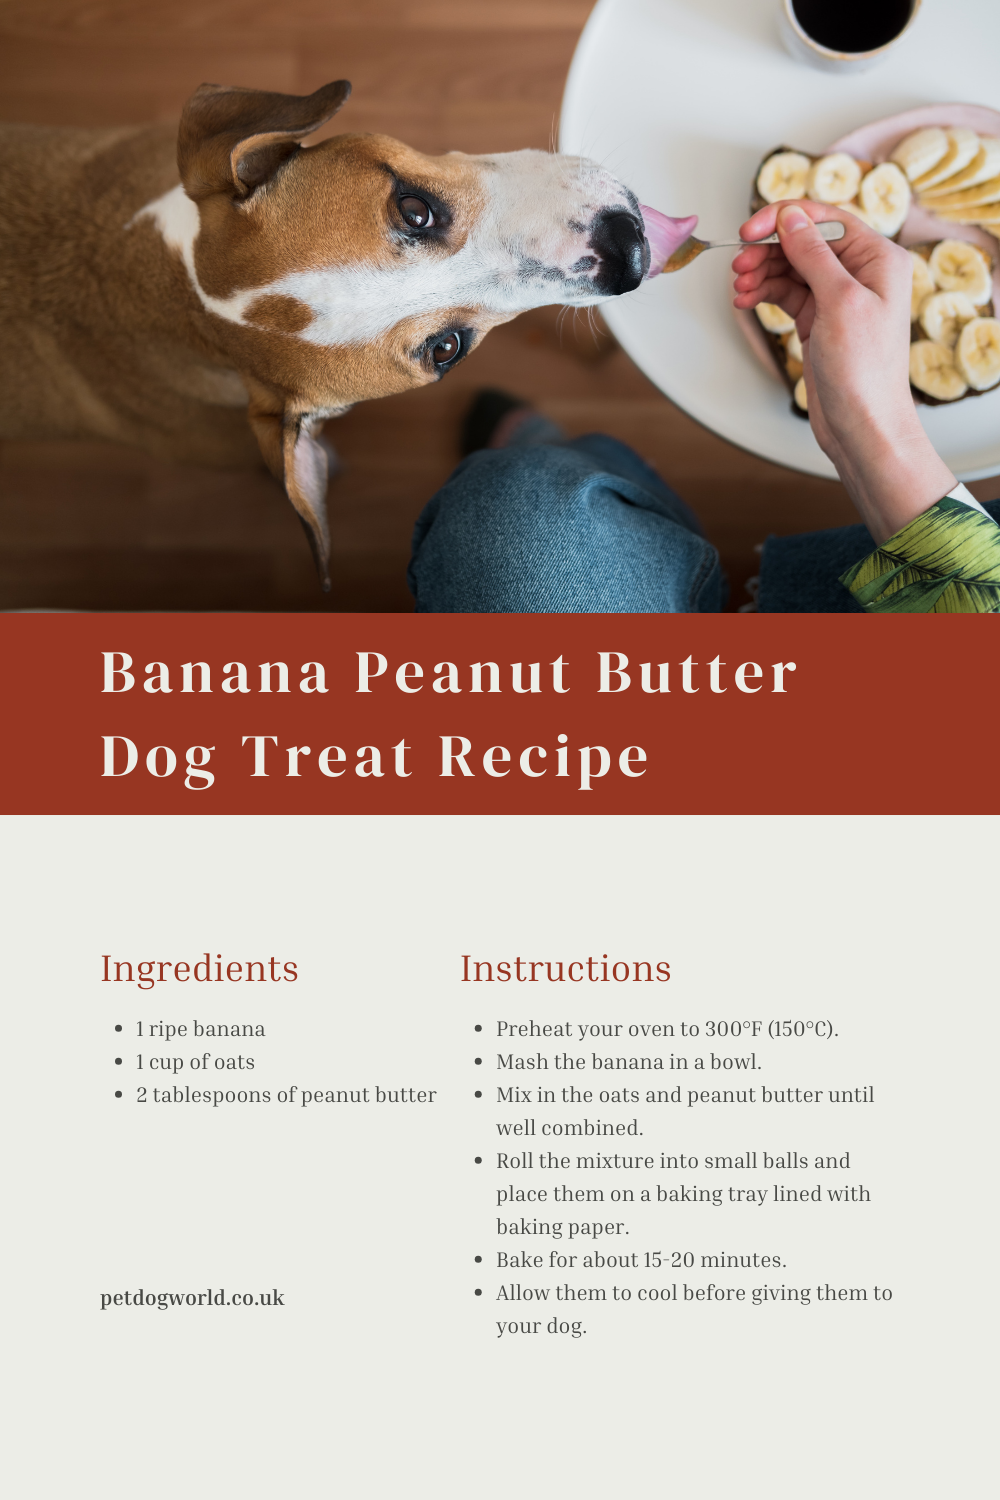 Whip up these easy and healthy Banana Peanut Butter Dog Treats! Packed with dog-friendly ingredients like ripe banana, oats, and peanut butter. Nutrient-rich and delicious.